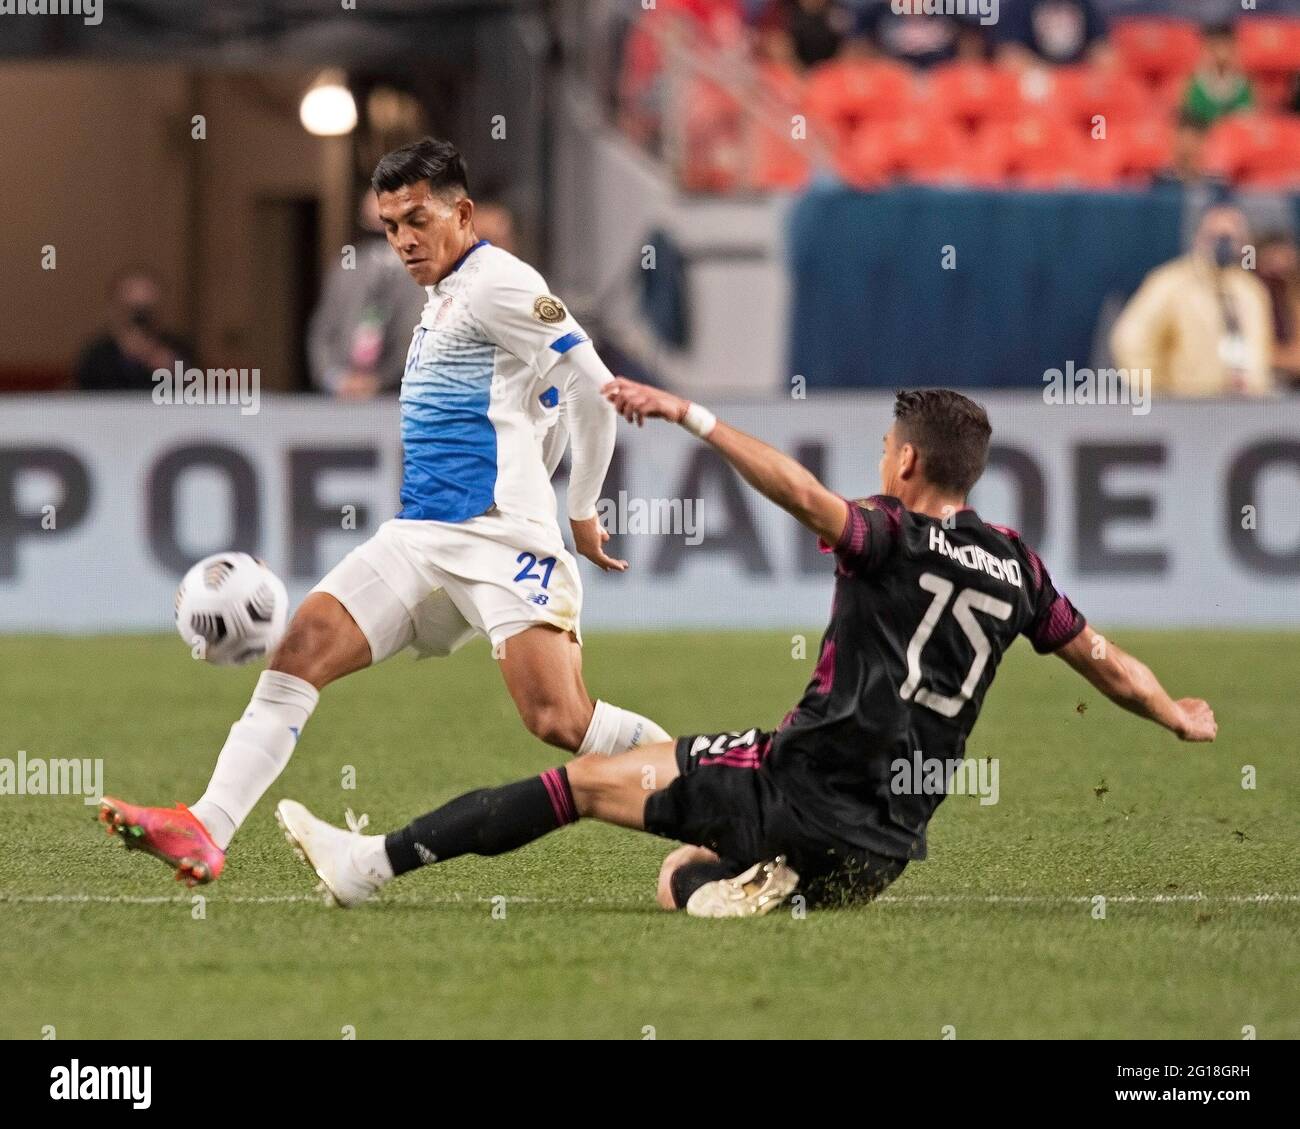 Denver, Colorado, USA. 3rd June, 2021. Costa Rica F ALONSO MARTINEZ, left, battles with Mexico D HECTOR MORENO, right, during the 2nd. Half. Mexico beats Costa Rica 1-0 in Penalty Kicks Wed. Night at Empower Field at Mile High. Credit: Hector Acevedo/ZUMA Wire/Alamy Live News Stock Photo